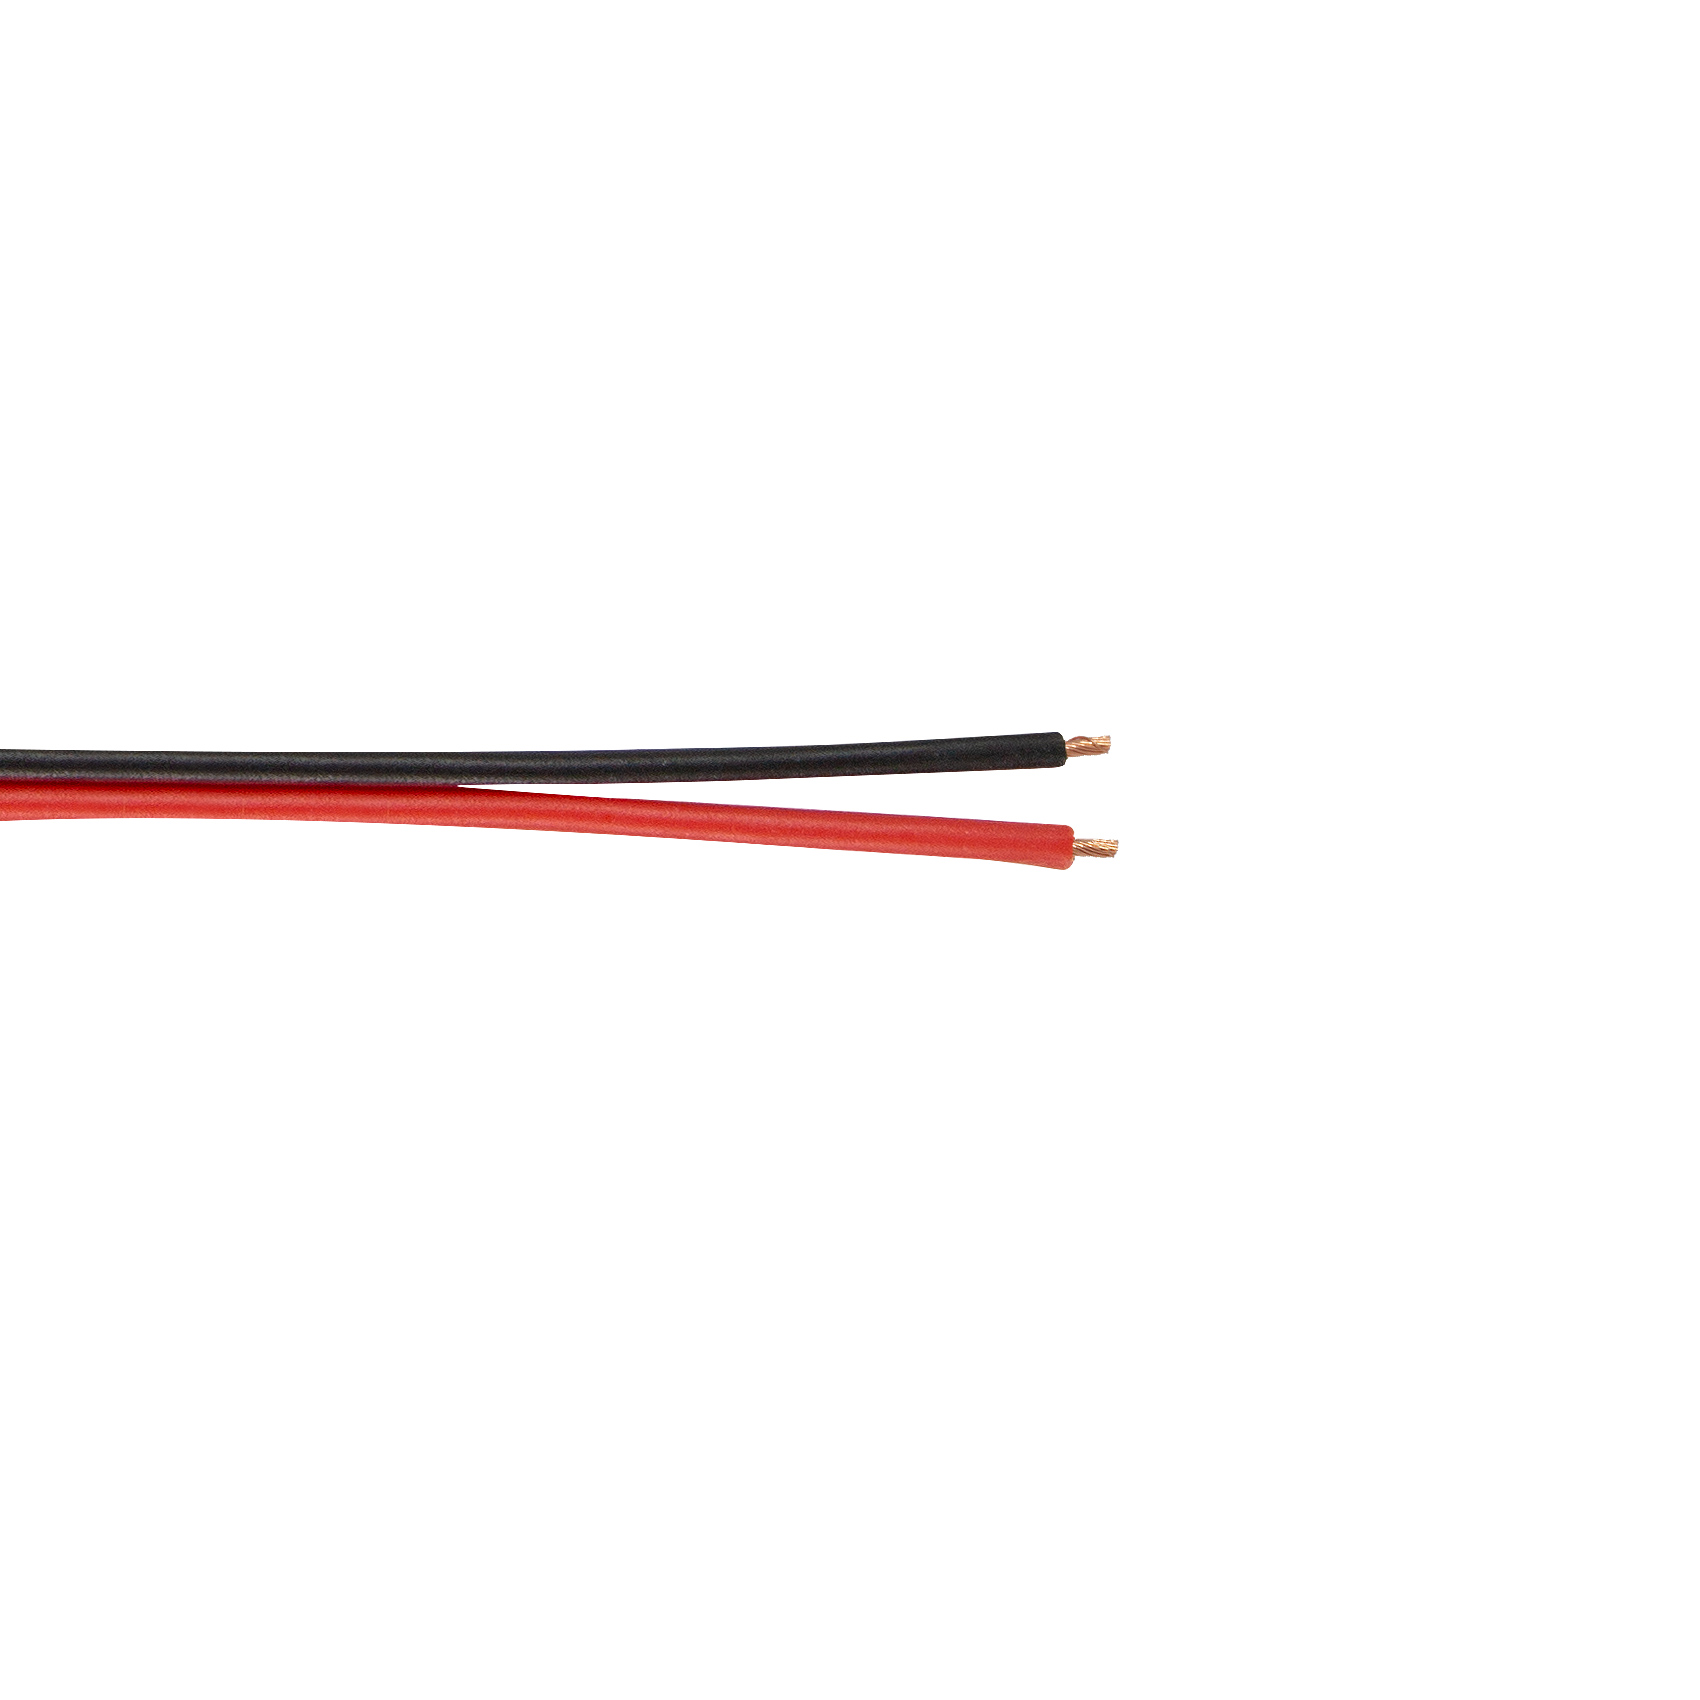 What Is Black And Red Wiring Wiring Digital And Schematic